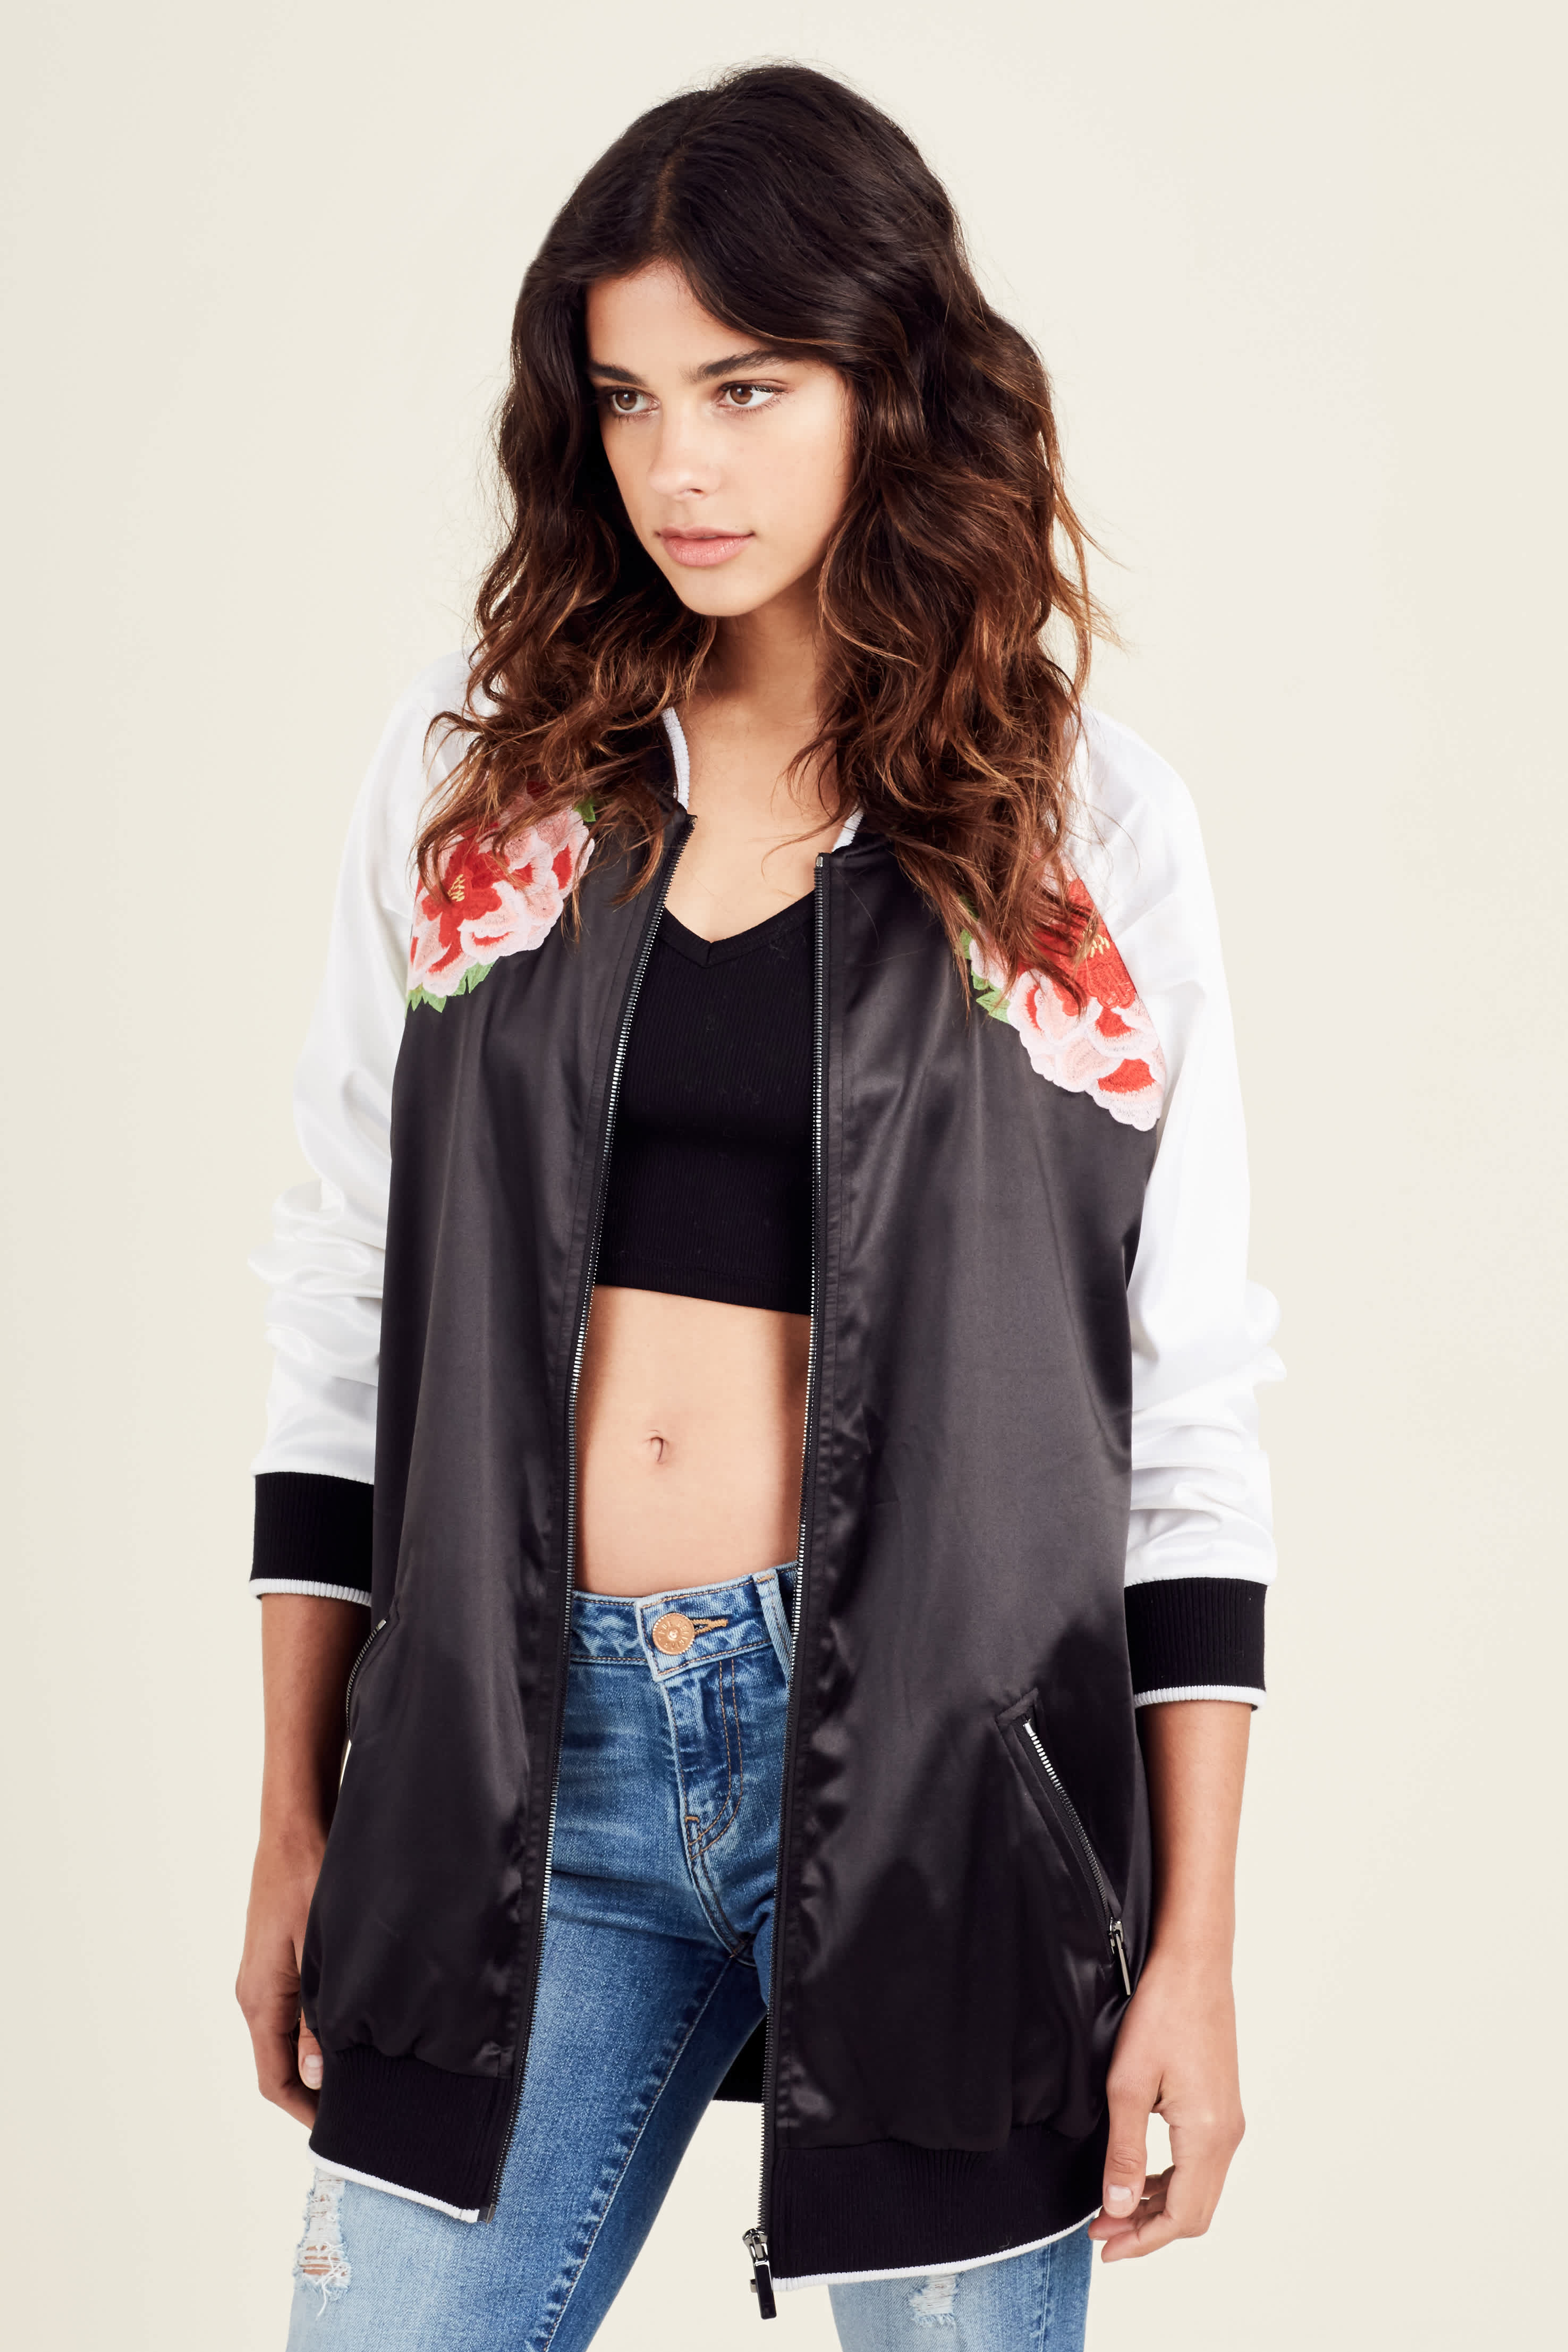 WOMENS EMBROIDERED FLORAL SATEEN BOMBER JACKET